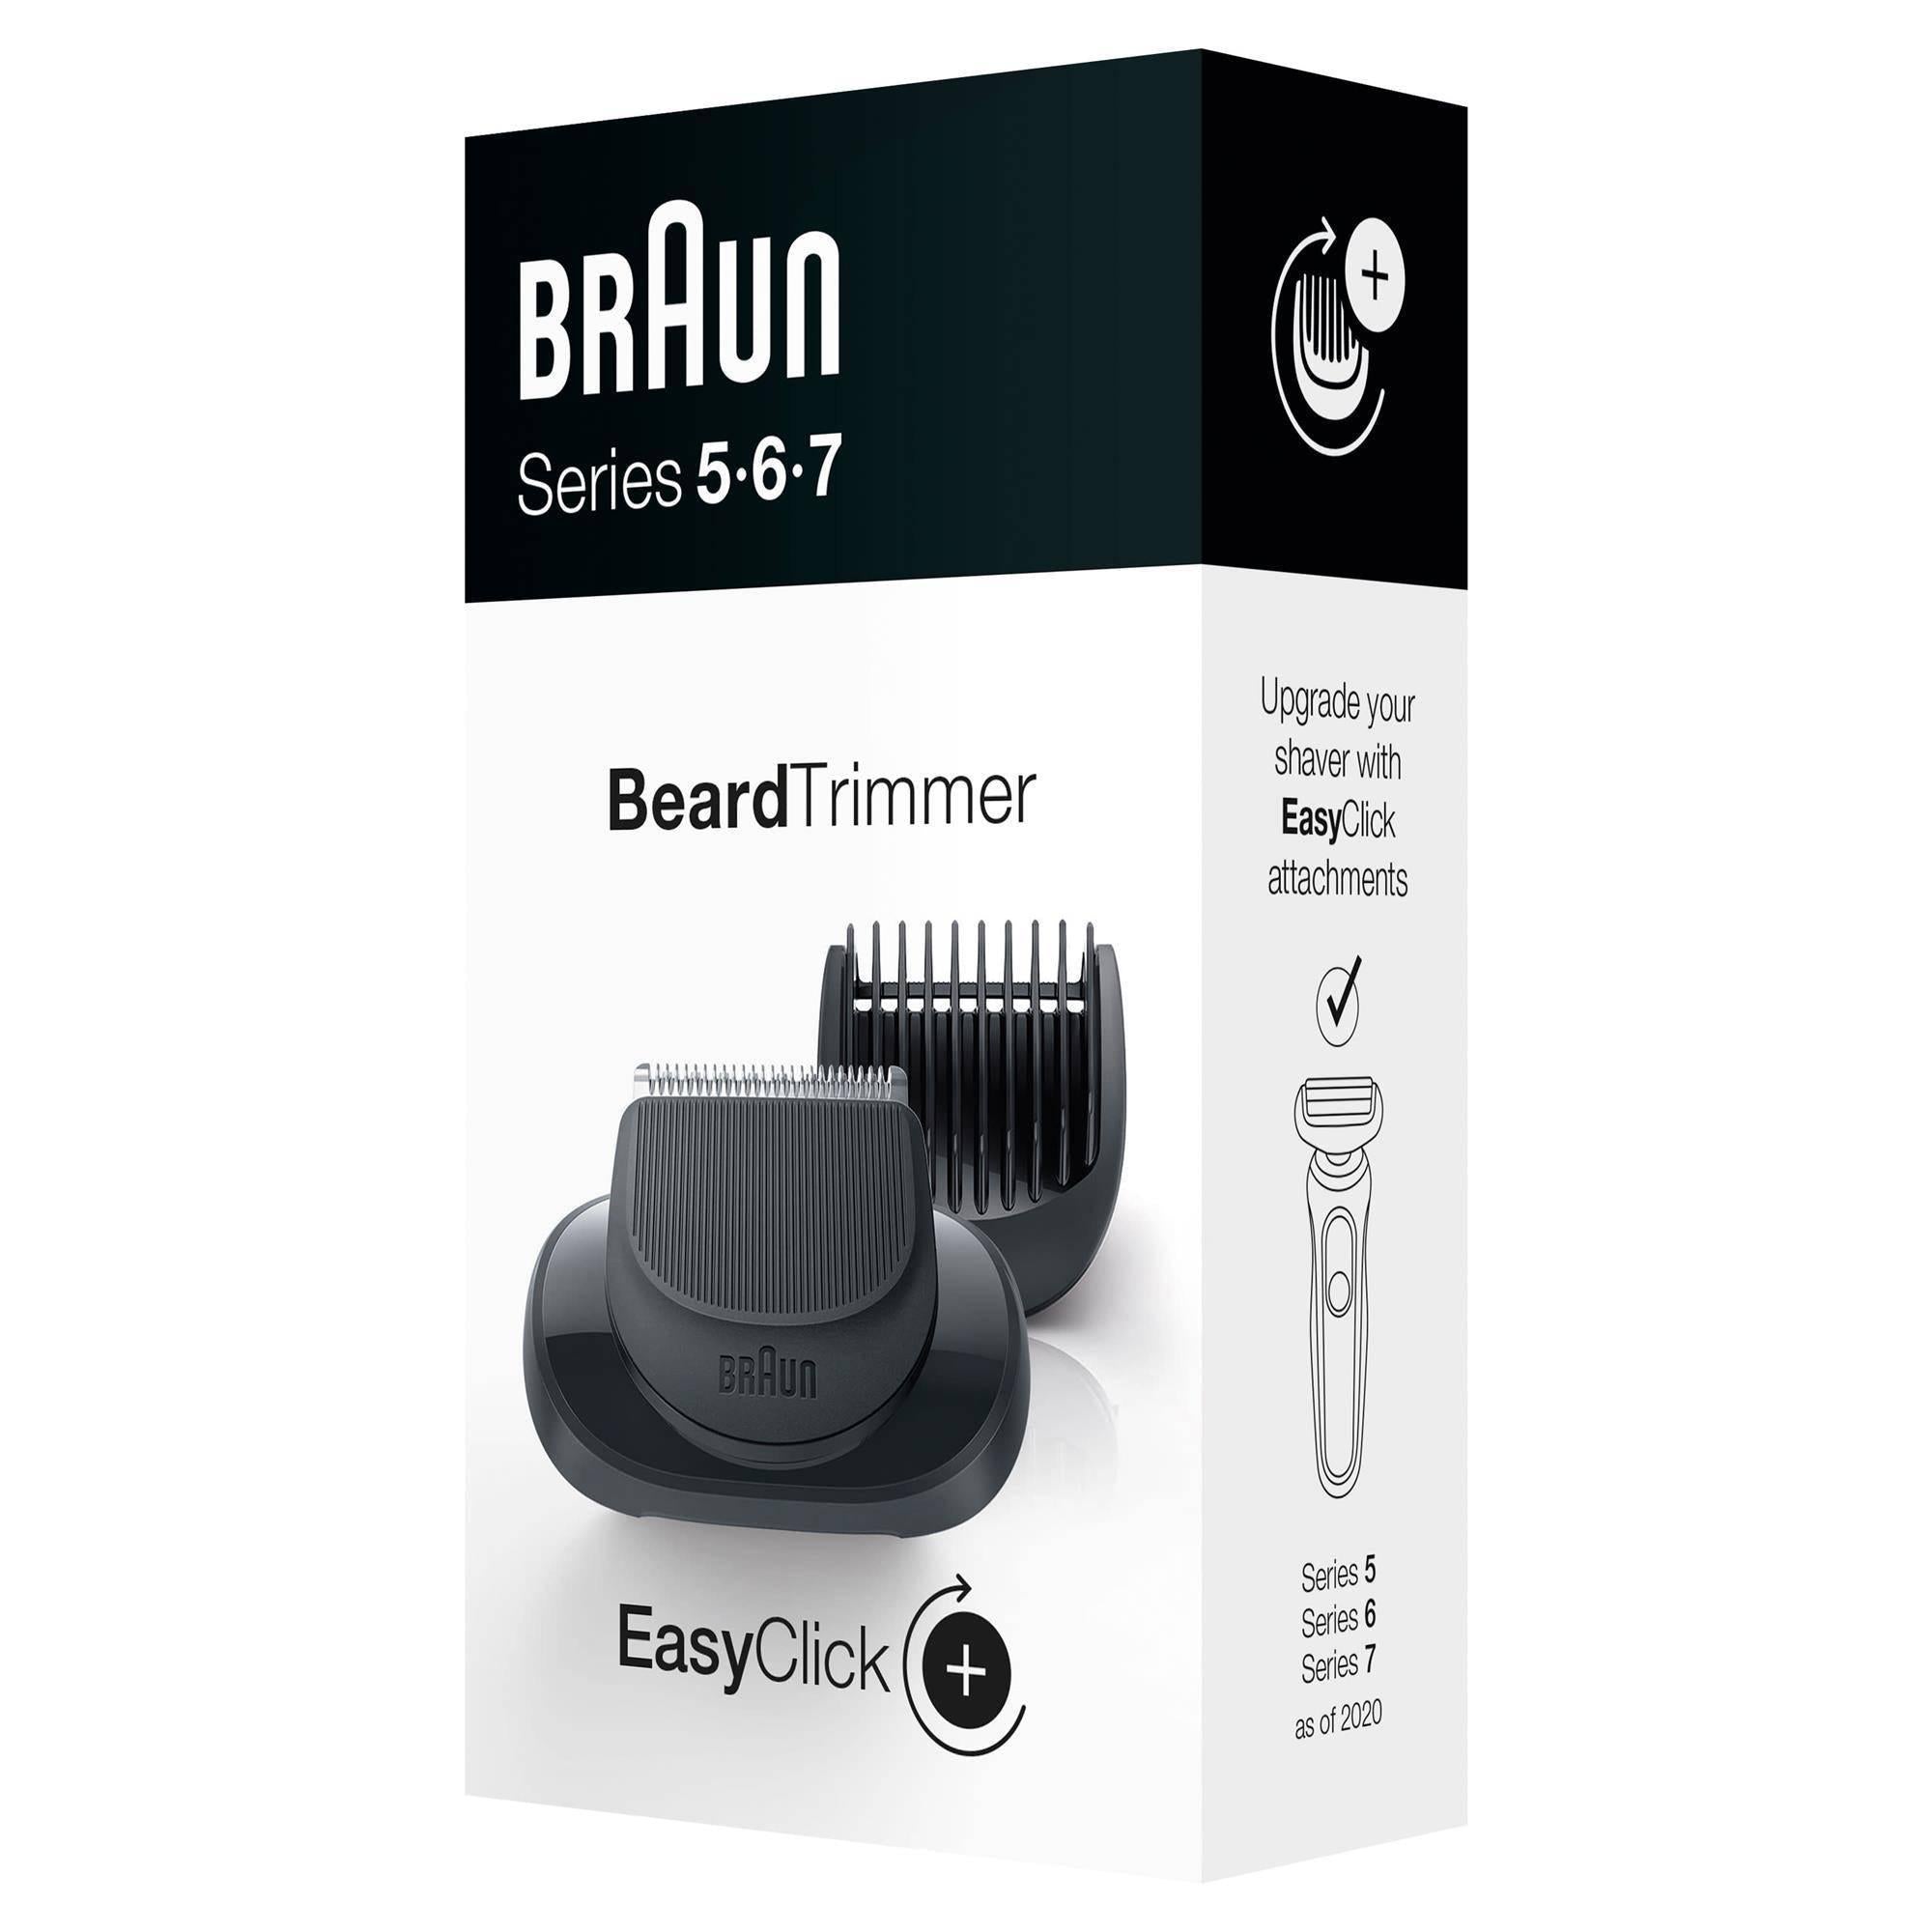 Braun EasyClick Beard Trimmer Attachment for Braun Series 5, 6 and 7 Shaver - 2020 Models Only - Healthxpress.ie